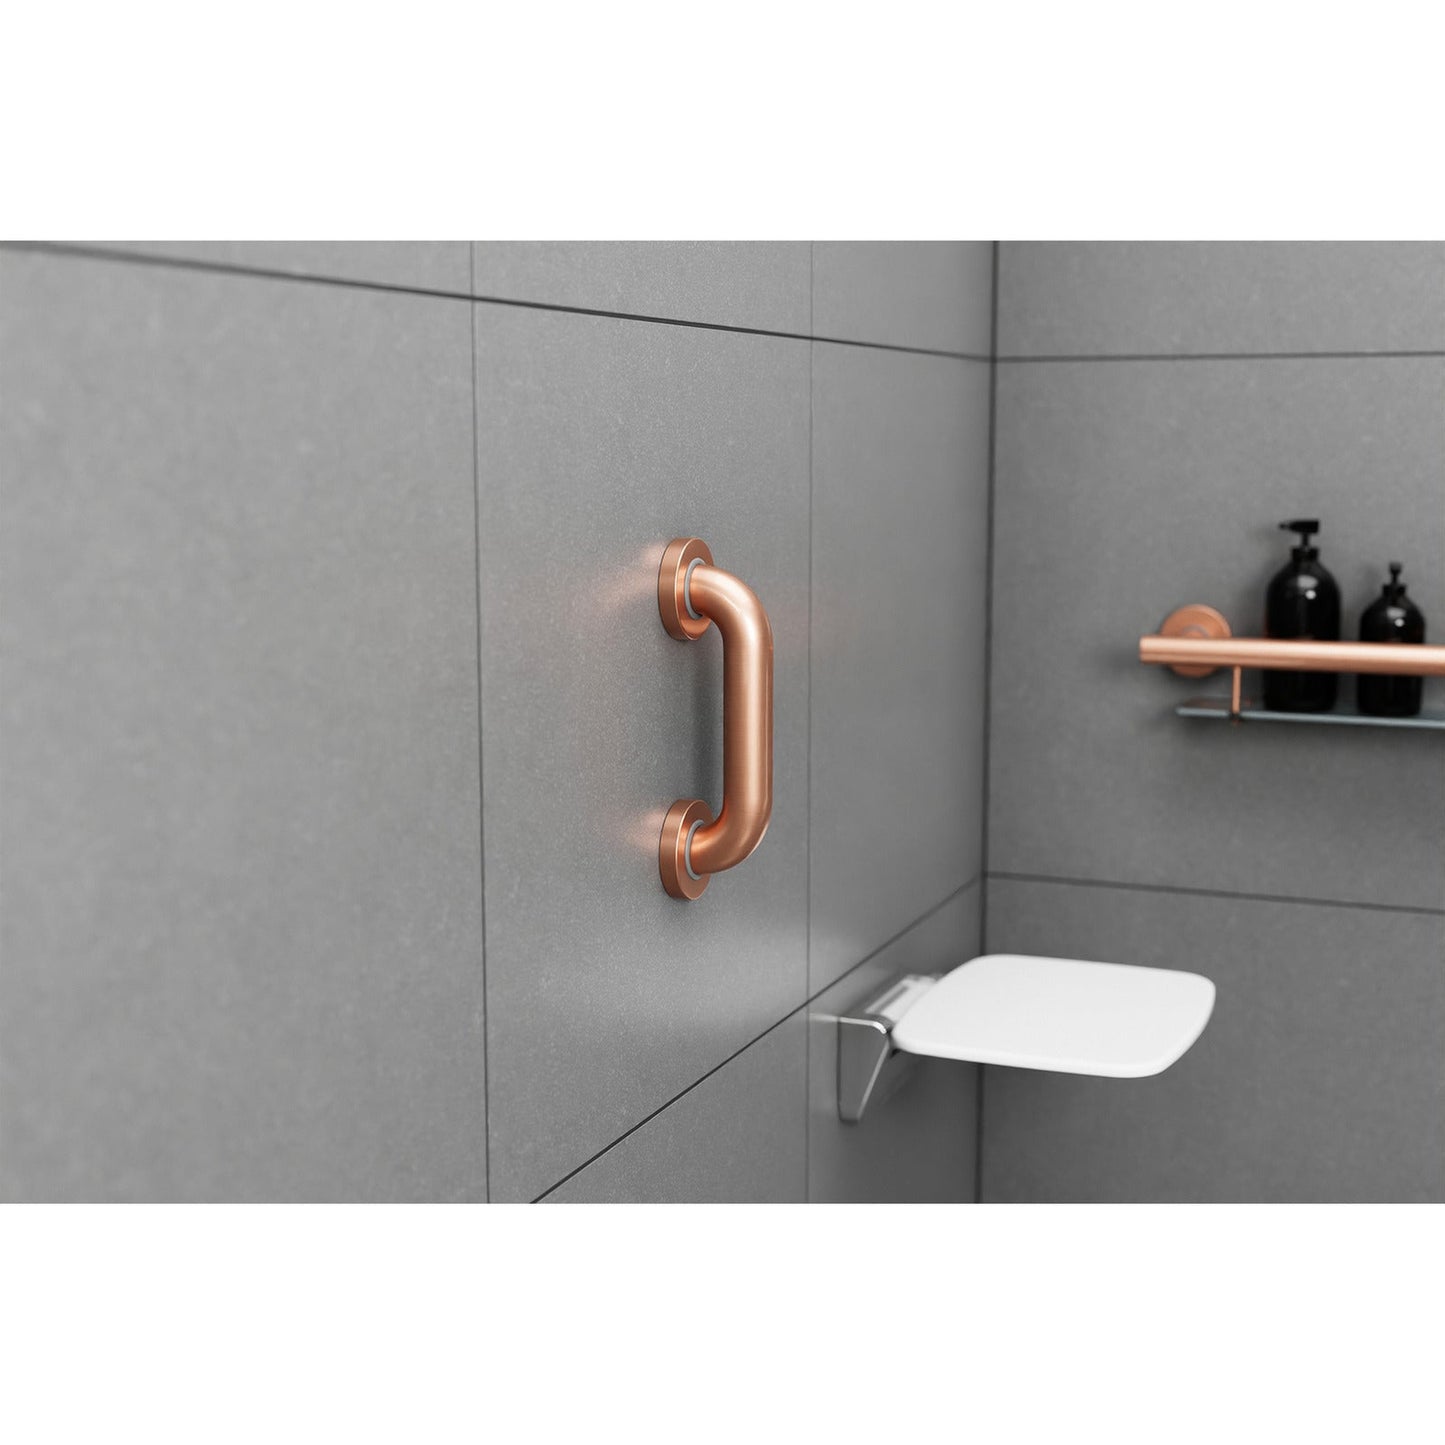 Evekare 8" x 1.5" Stainless Steel Concealed Mount Grab Bar in Brushed Rose Gold